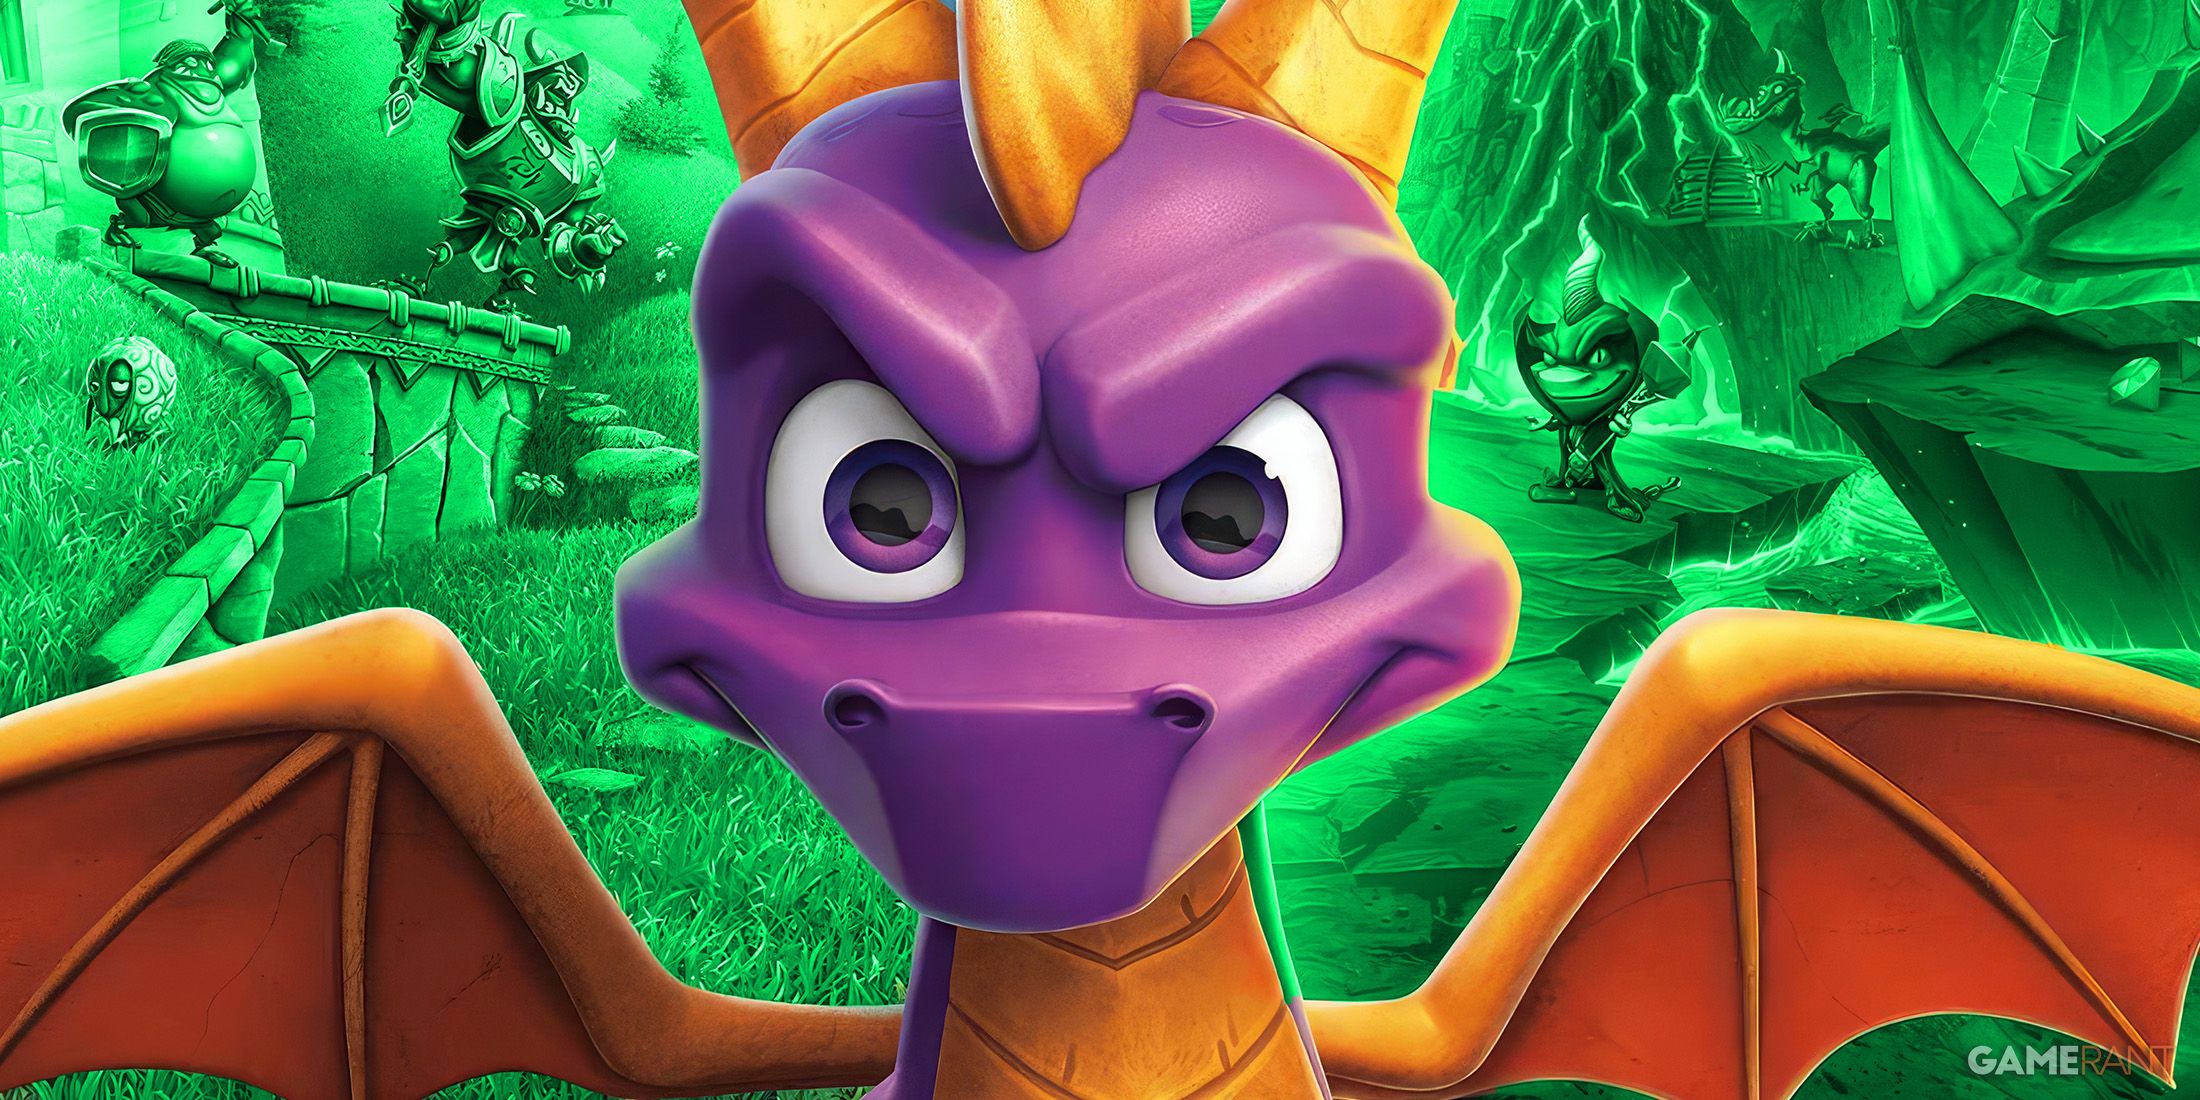 Spyro Reignited Trilogy upscaled cover purple dragon on green background upscaled